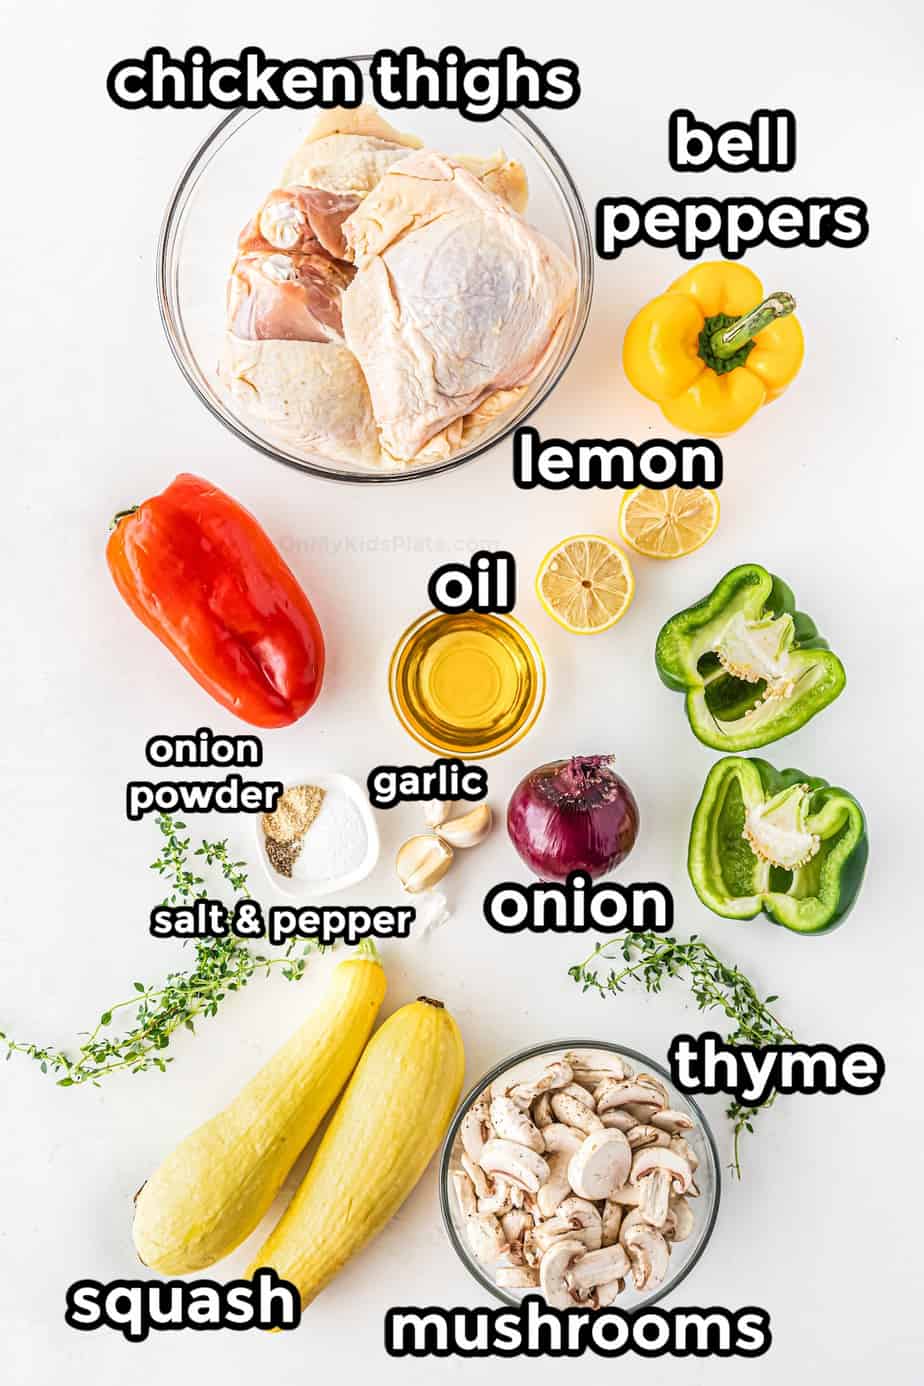 Ingredients for Baked Chicken Thighs with Squash and Peppers